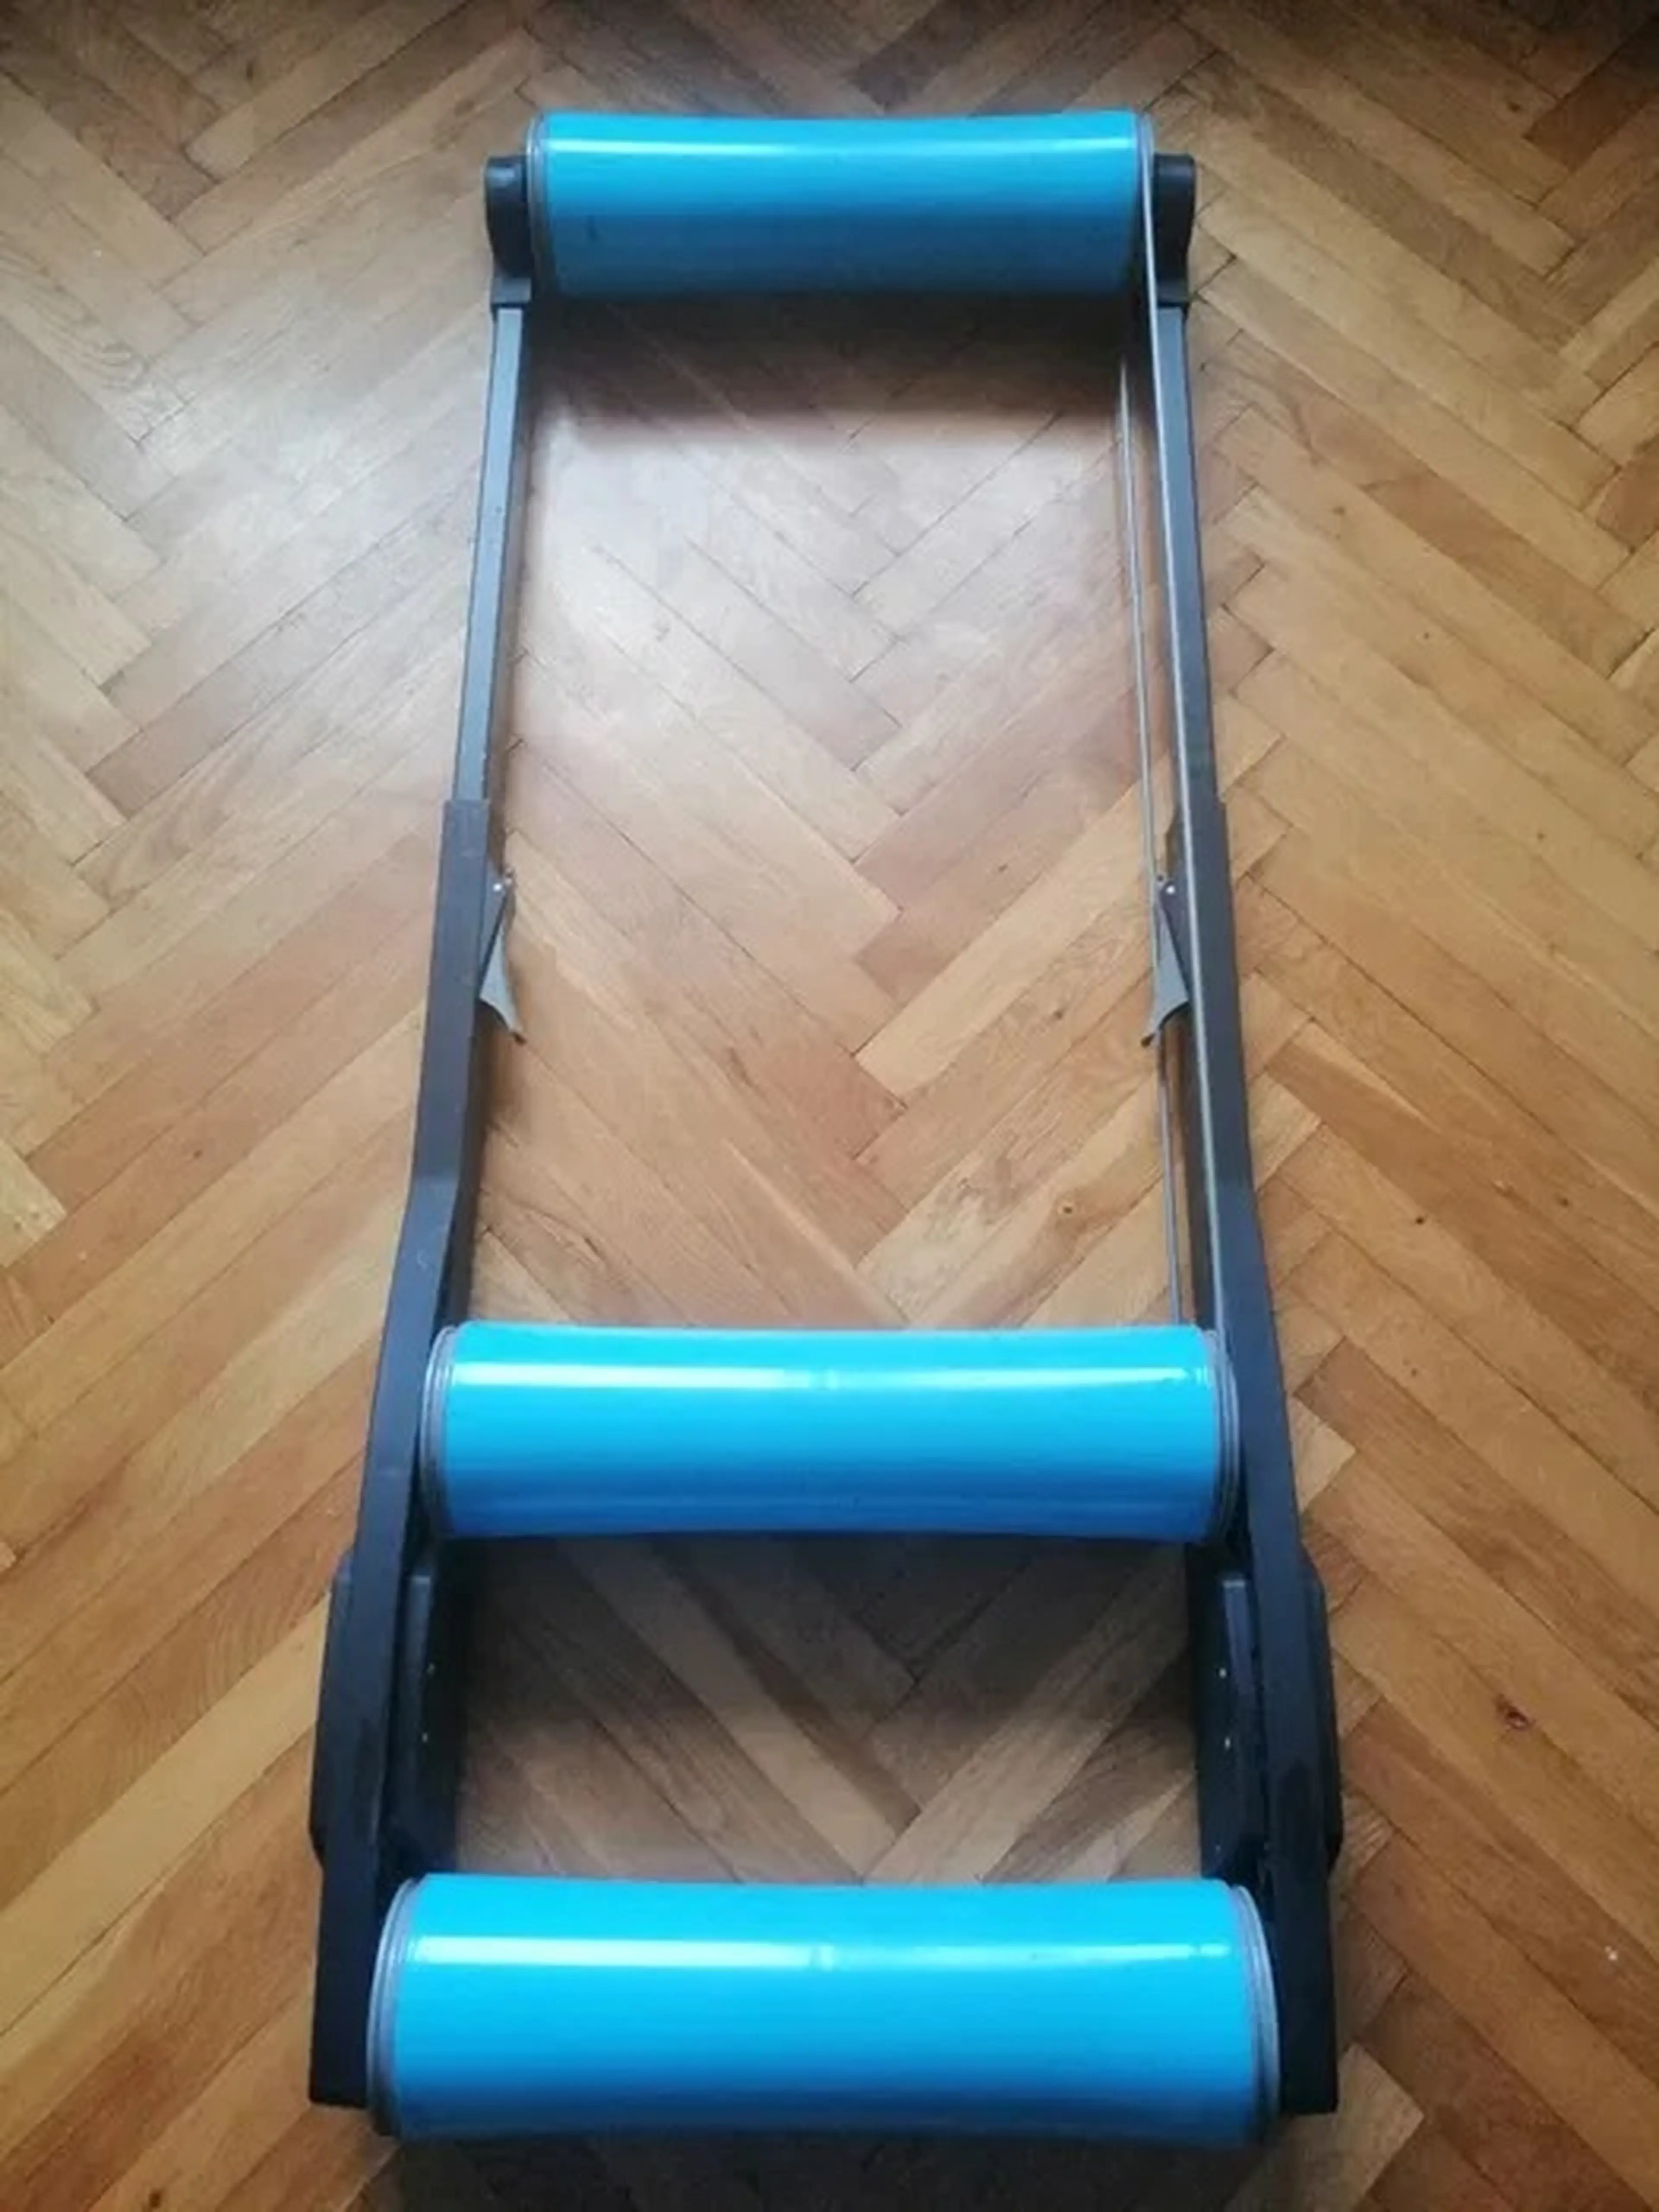 2. Roller Tacx Galaxia